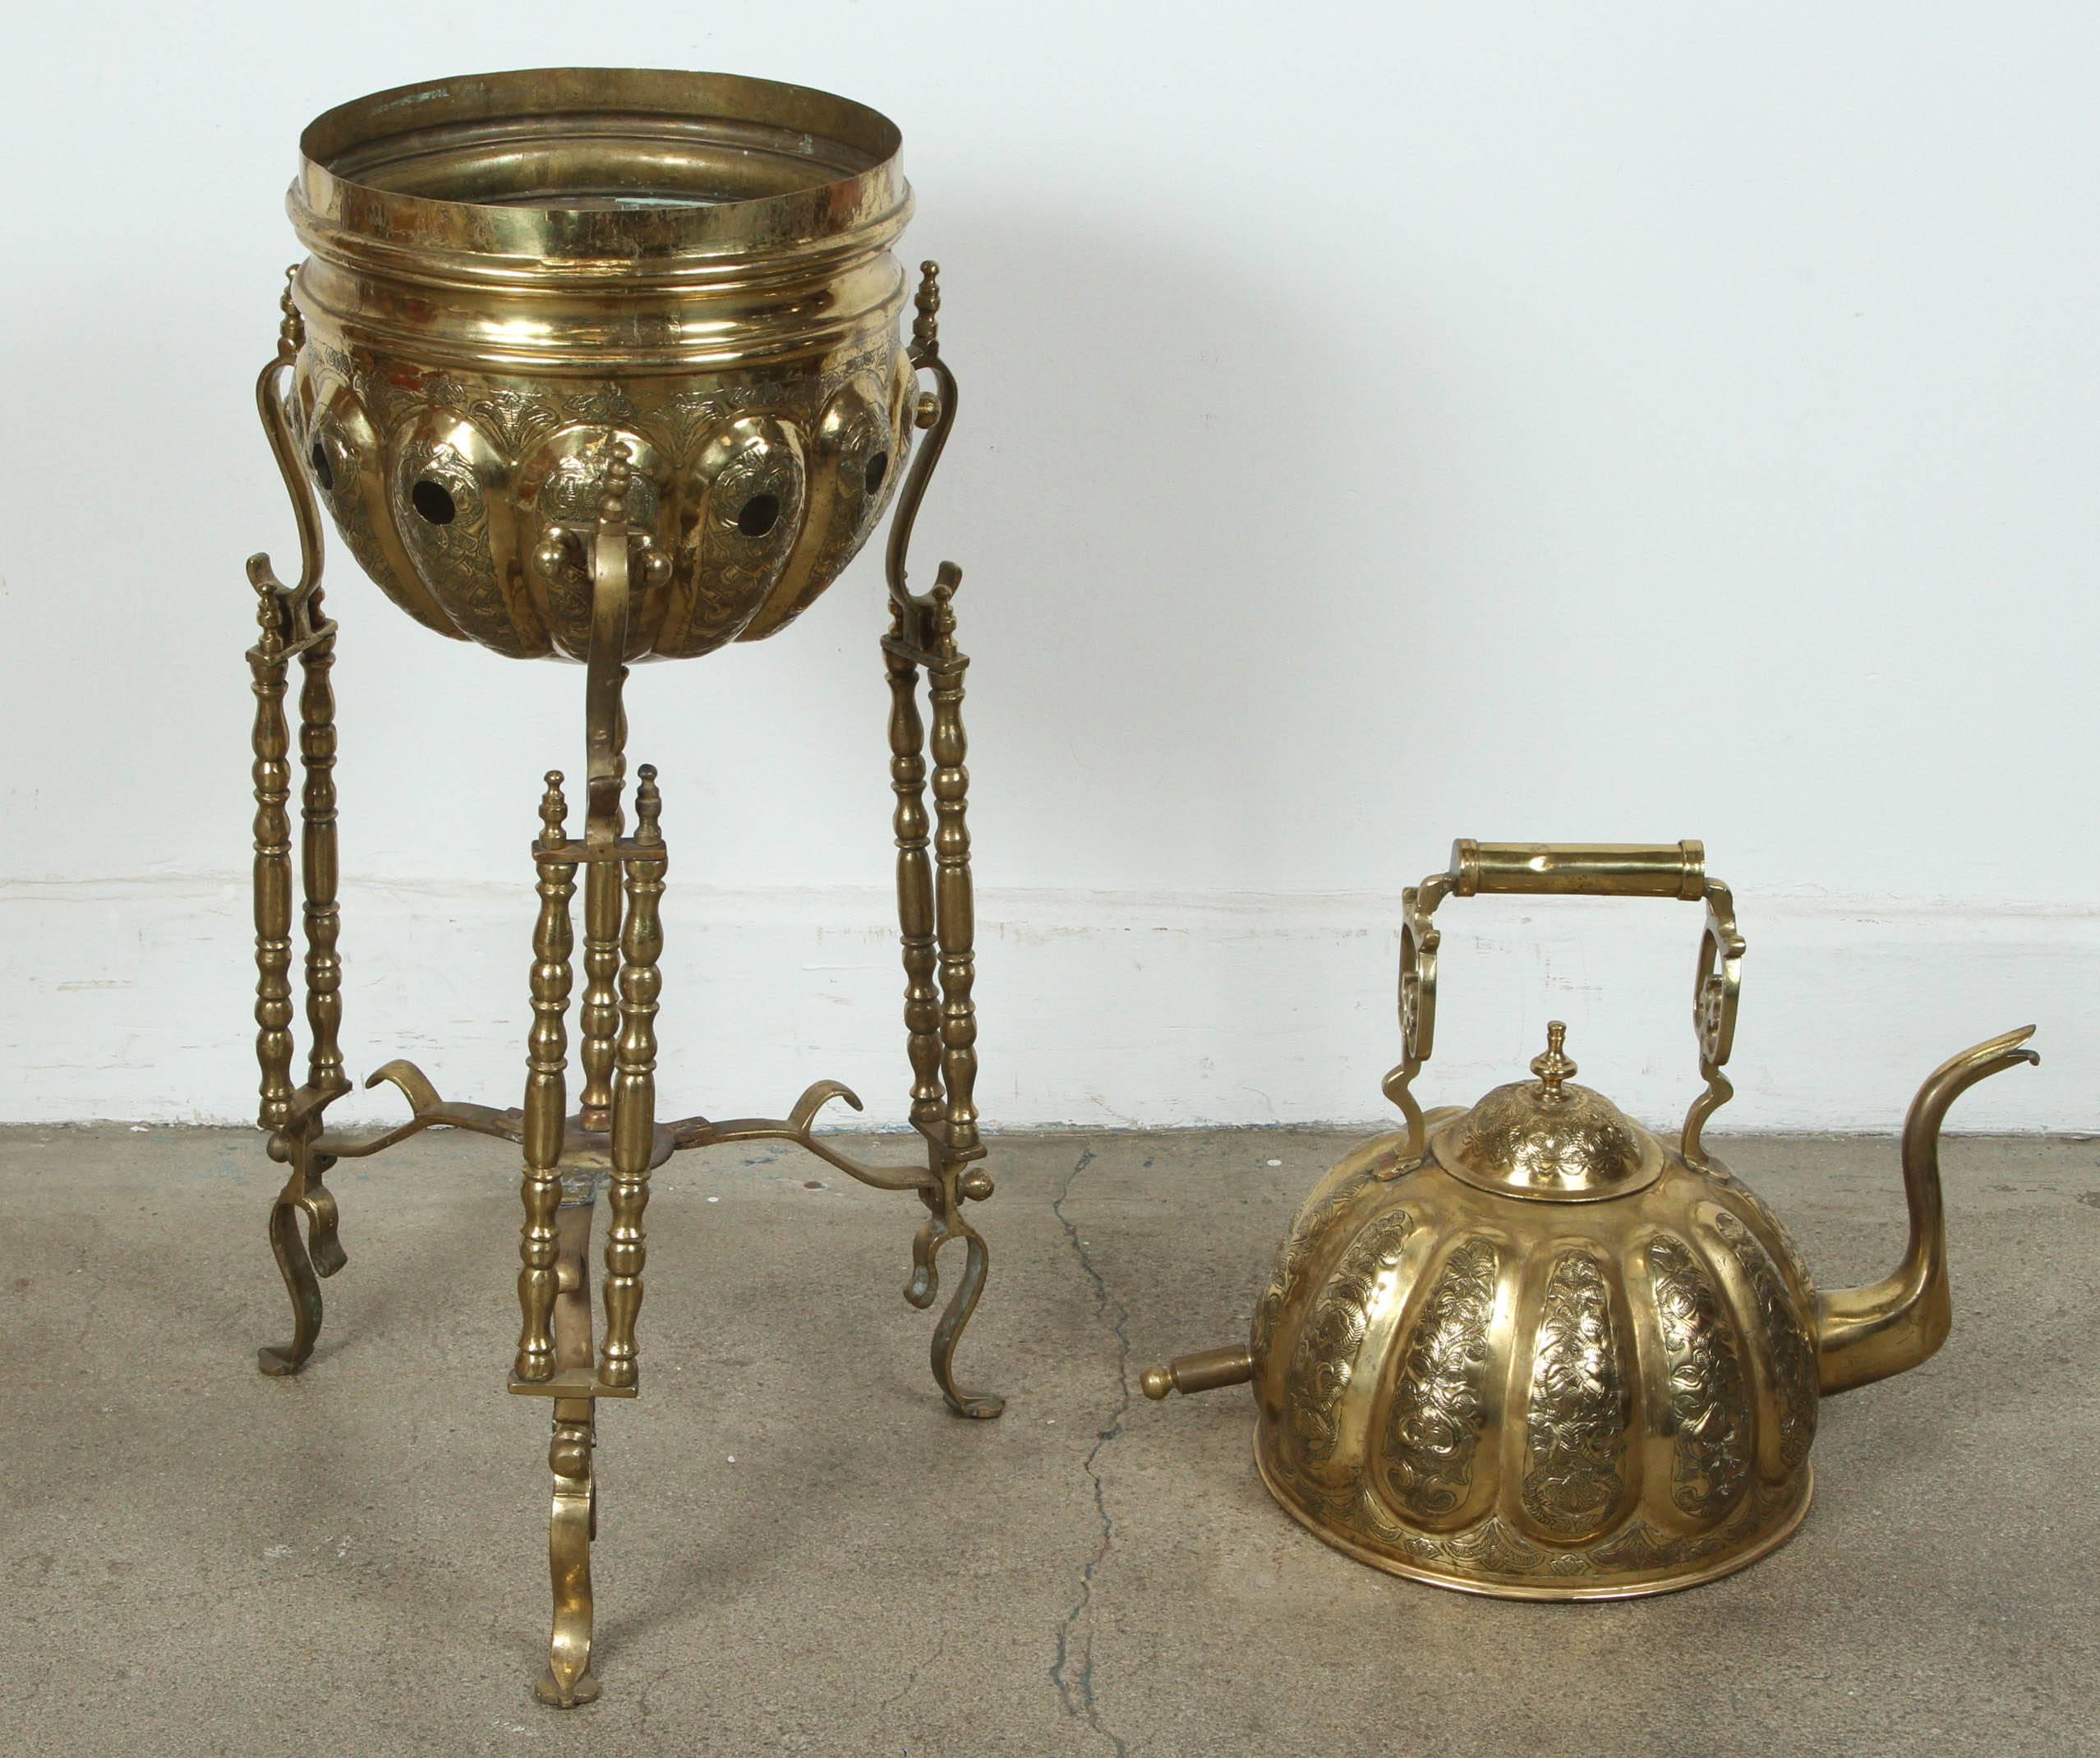 Moroccan Brass Tea Kettle on Stand Handcrafted in Fez Morocco For Sale 1